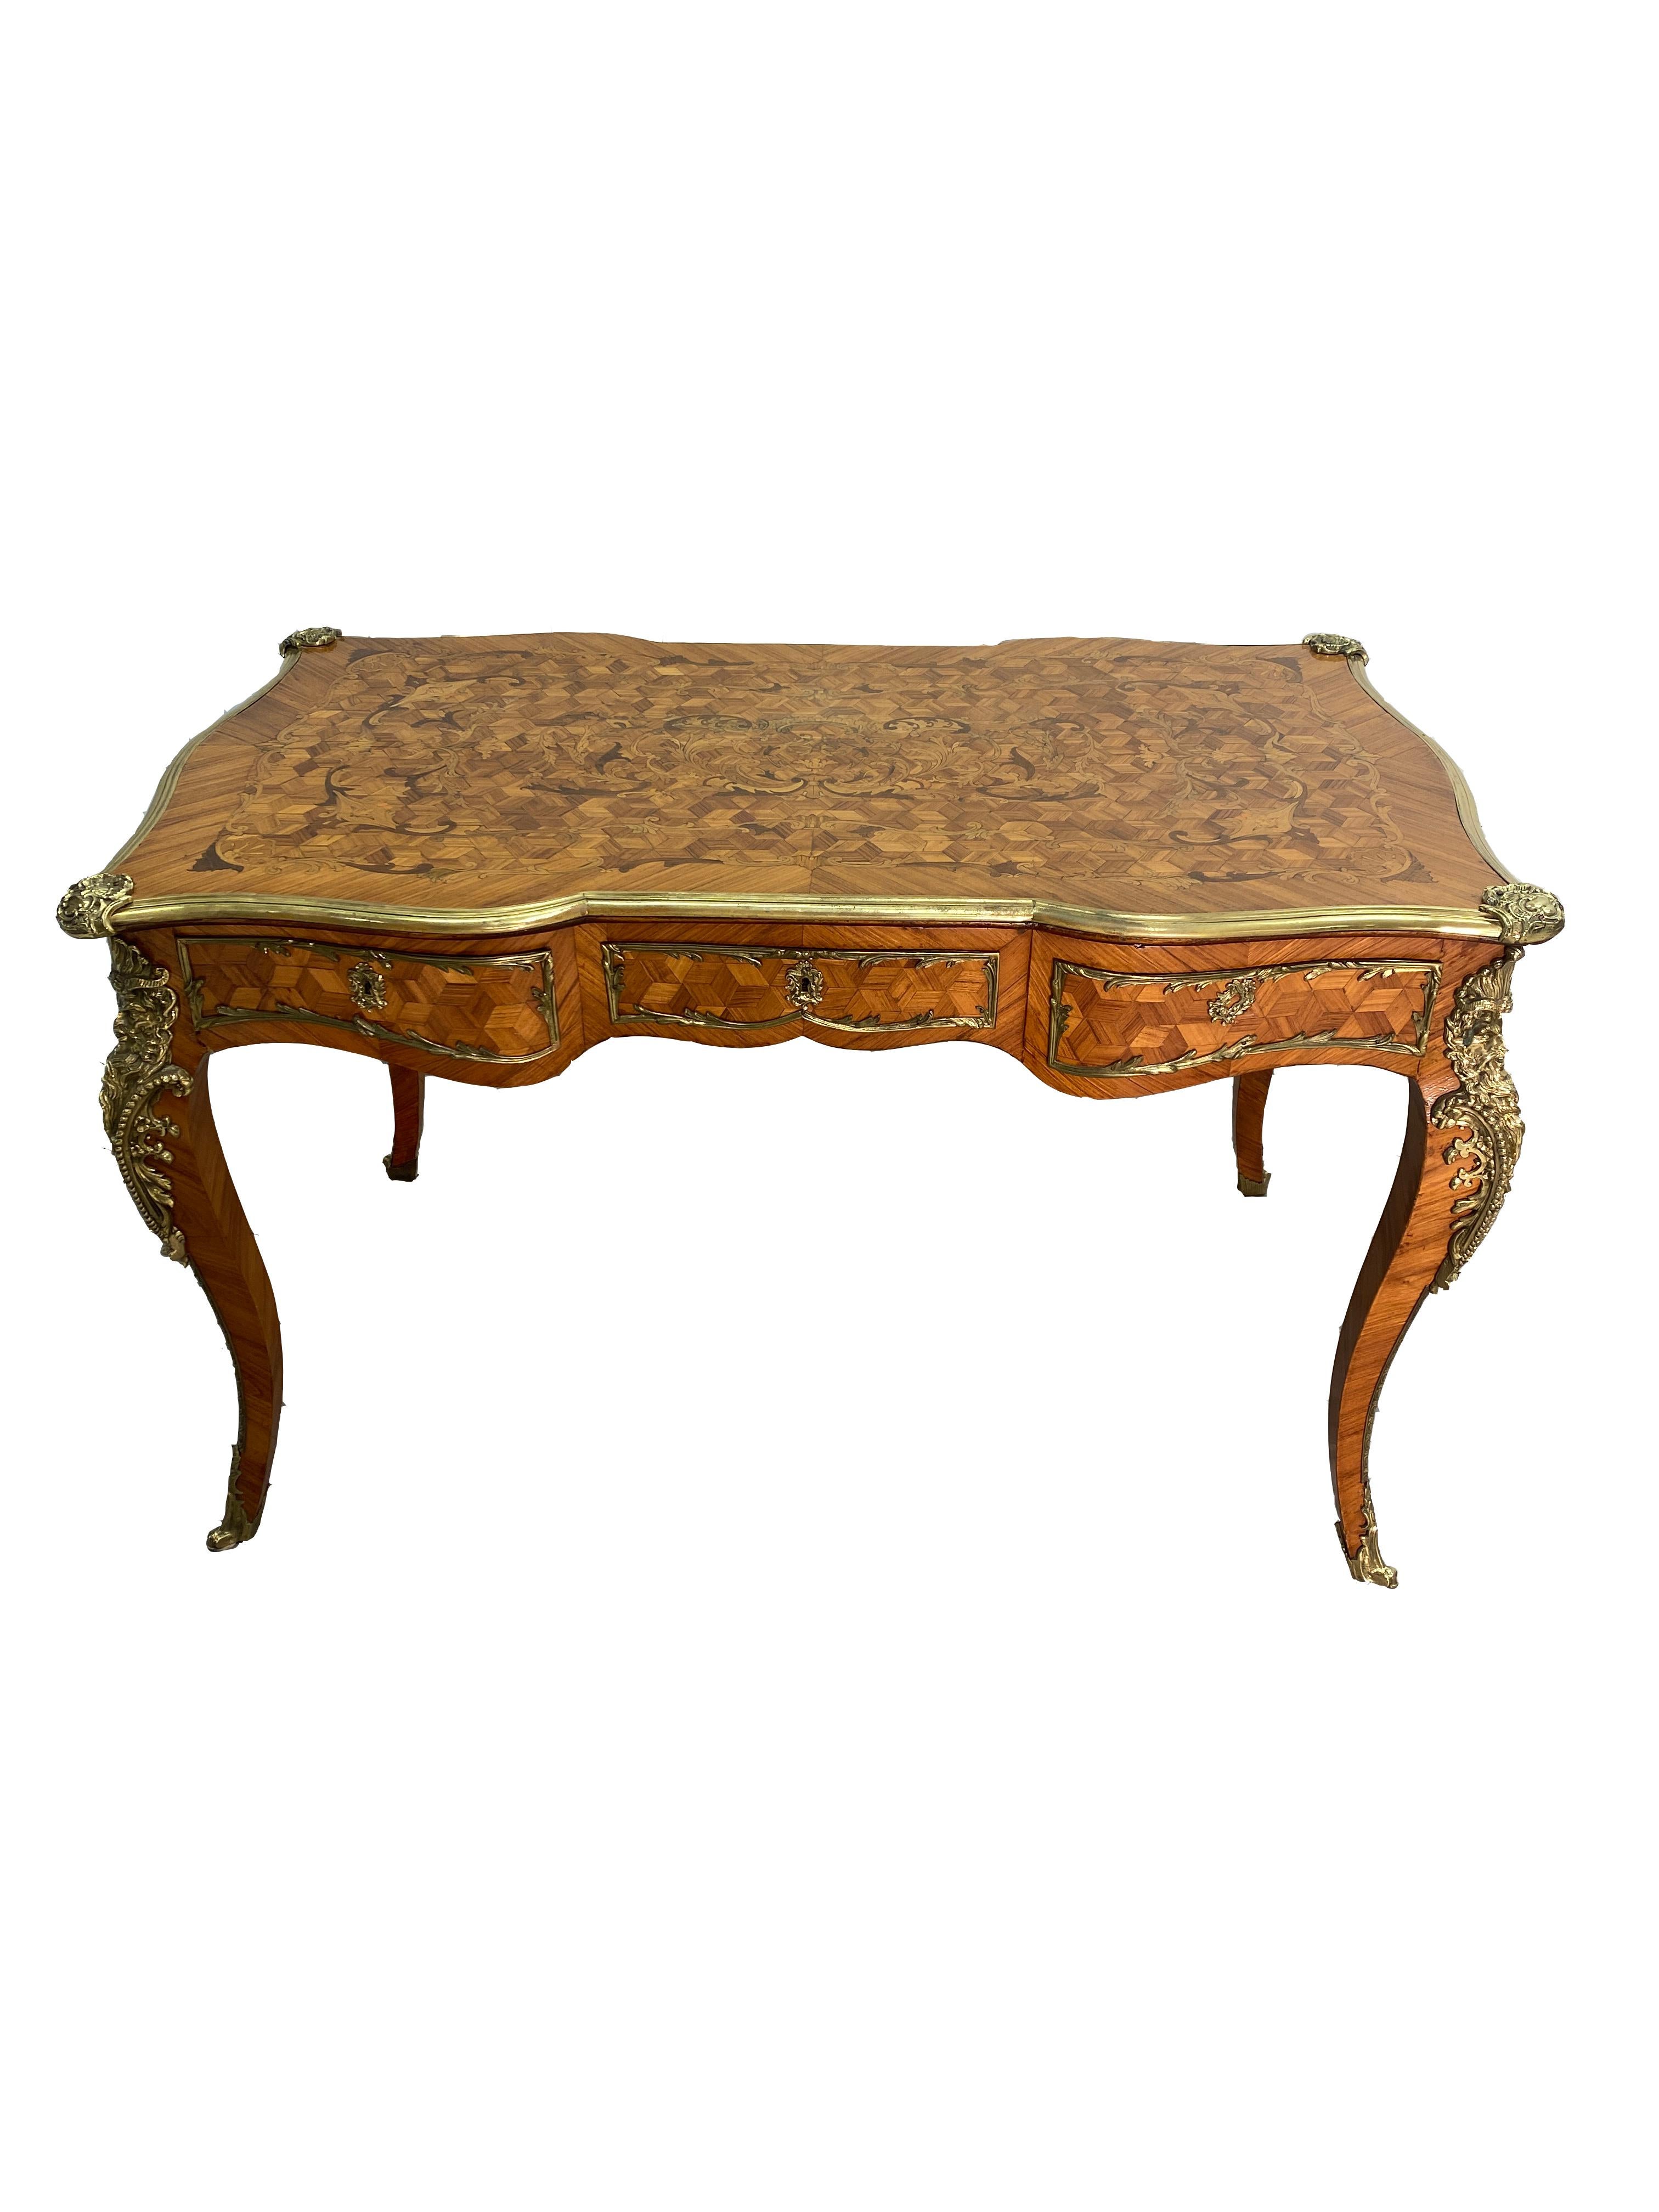 This is a handsome French Bureau plat desk in Louis XV style, made in France Circa 1880. The desk is decorated highly with parquetry and marquetry inlay on the sides and top. The brass ormolu is highly polished throughout the desk. Three drawers